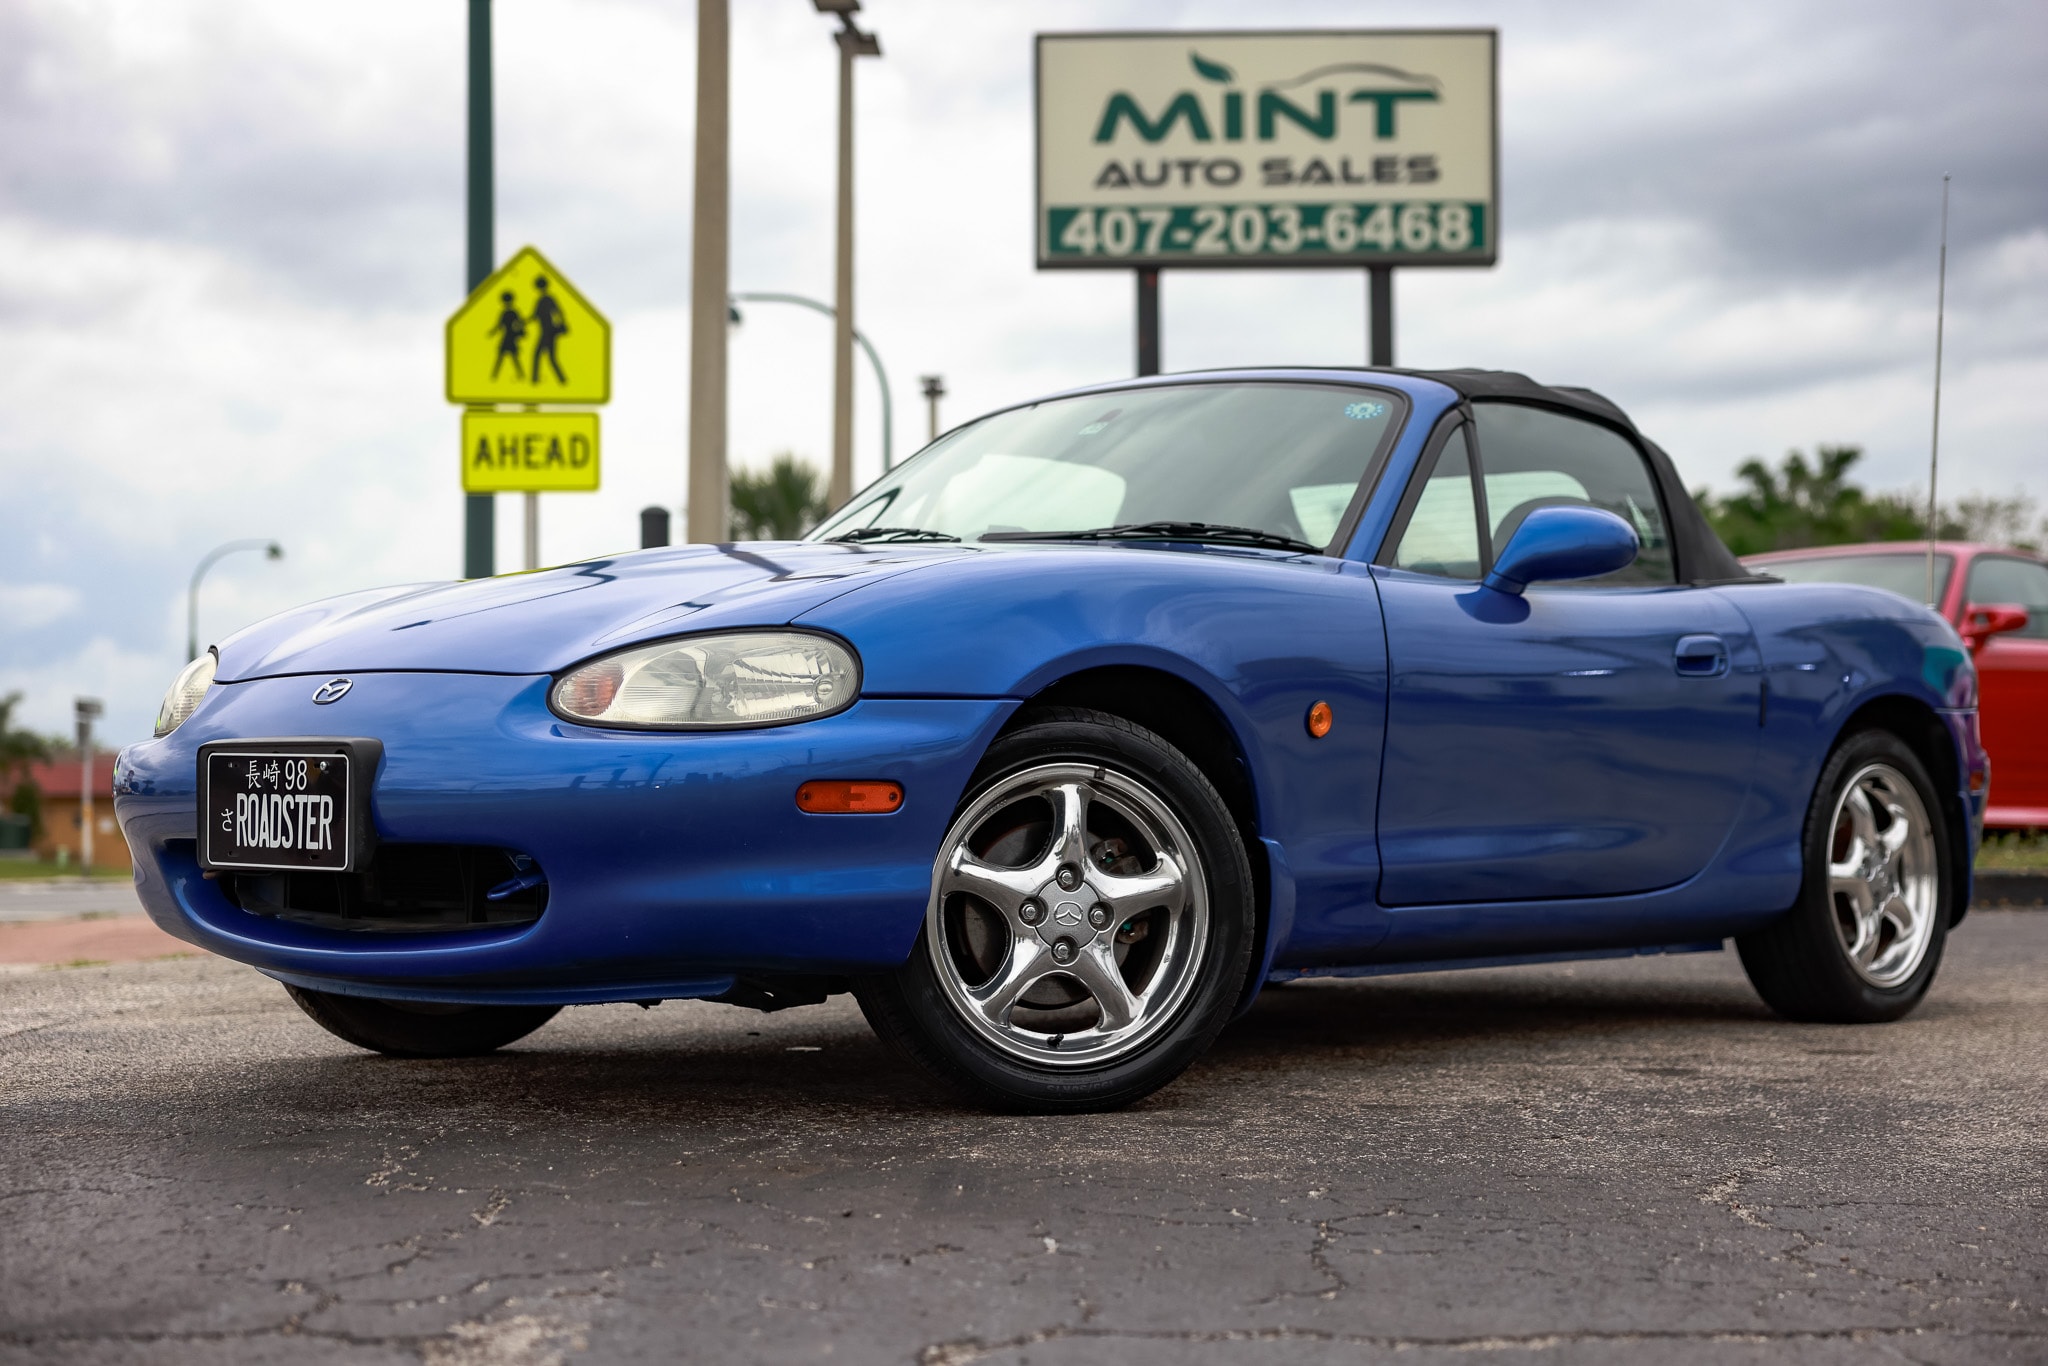 Used 1998 Mazda Roadster For Sale at Mint Auto Sales | VIN 